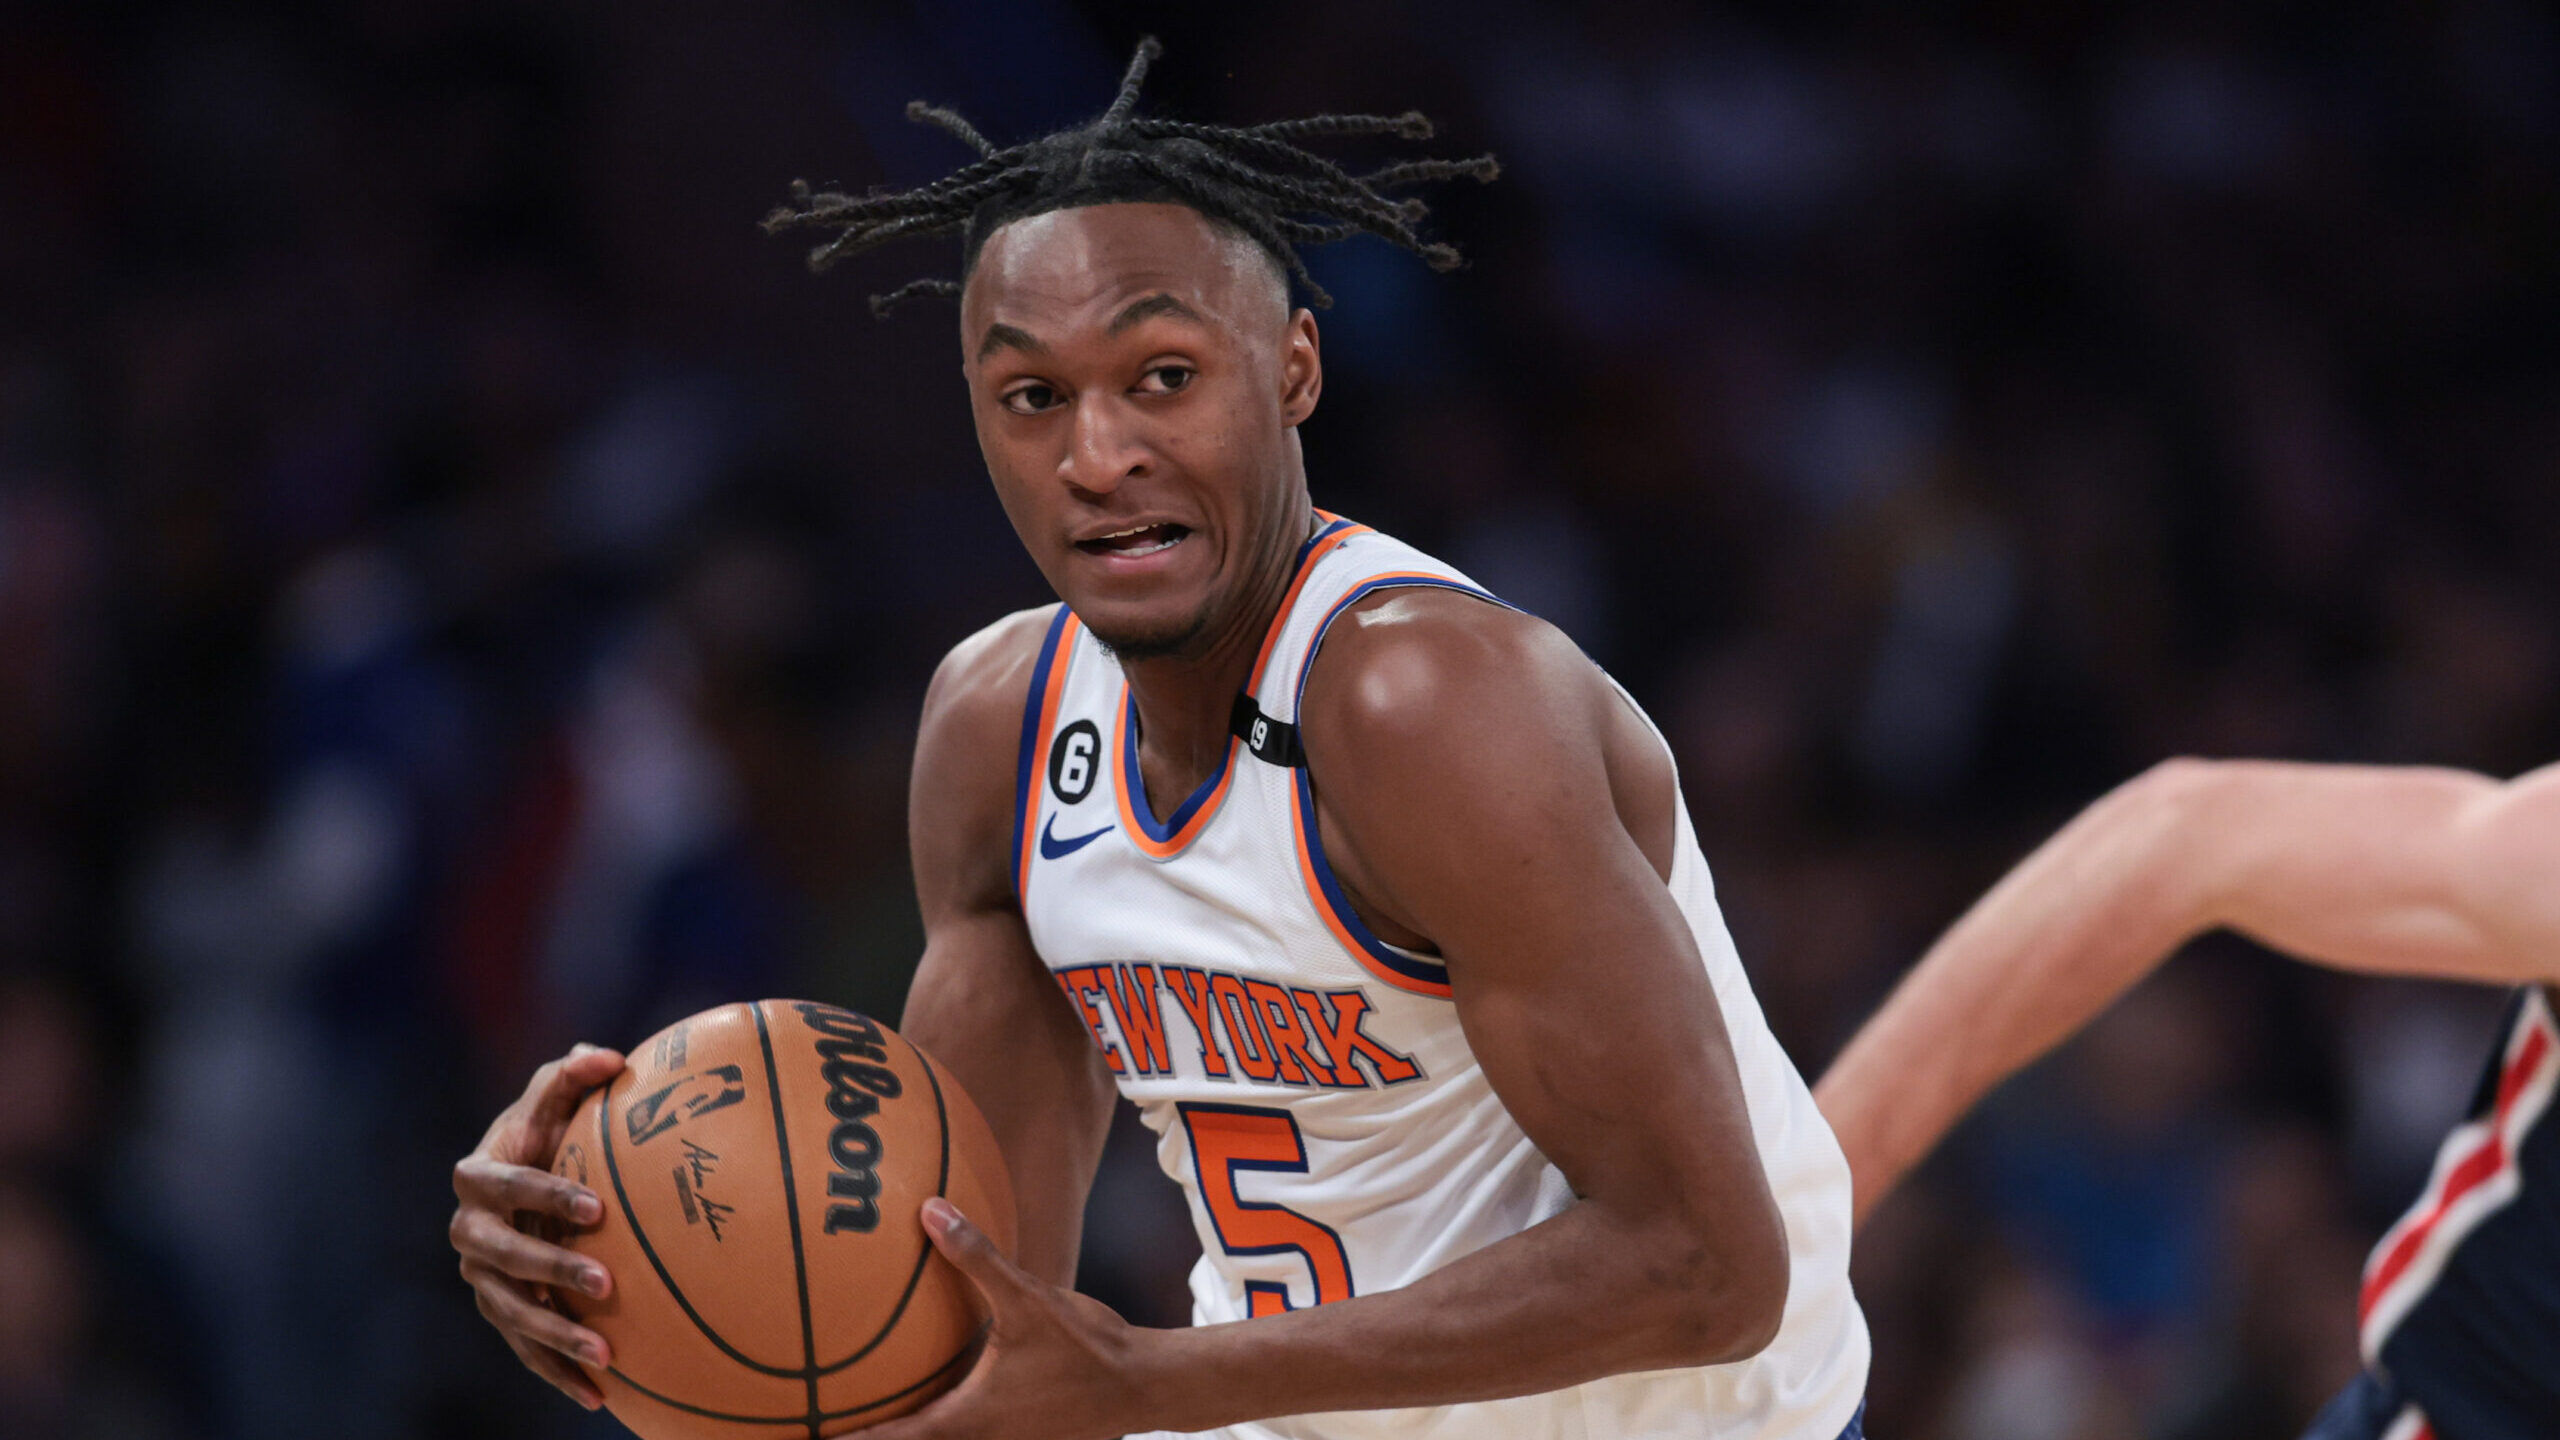 Indiana Pacers vs. New York Knicks Spread, Line, Odds, Predictions, Picks, and Betting Preview